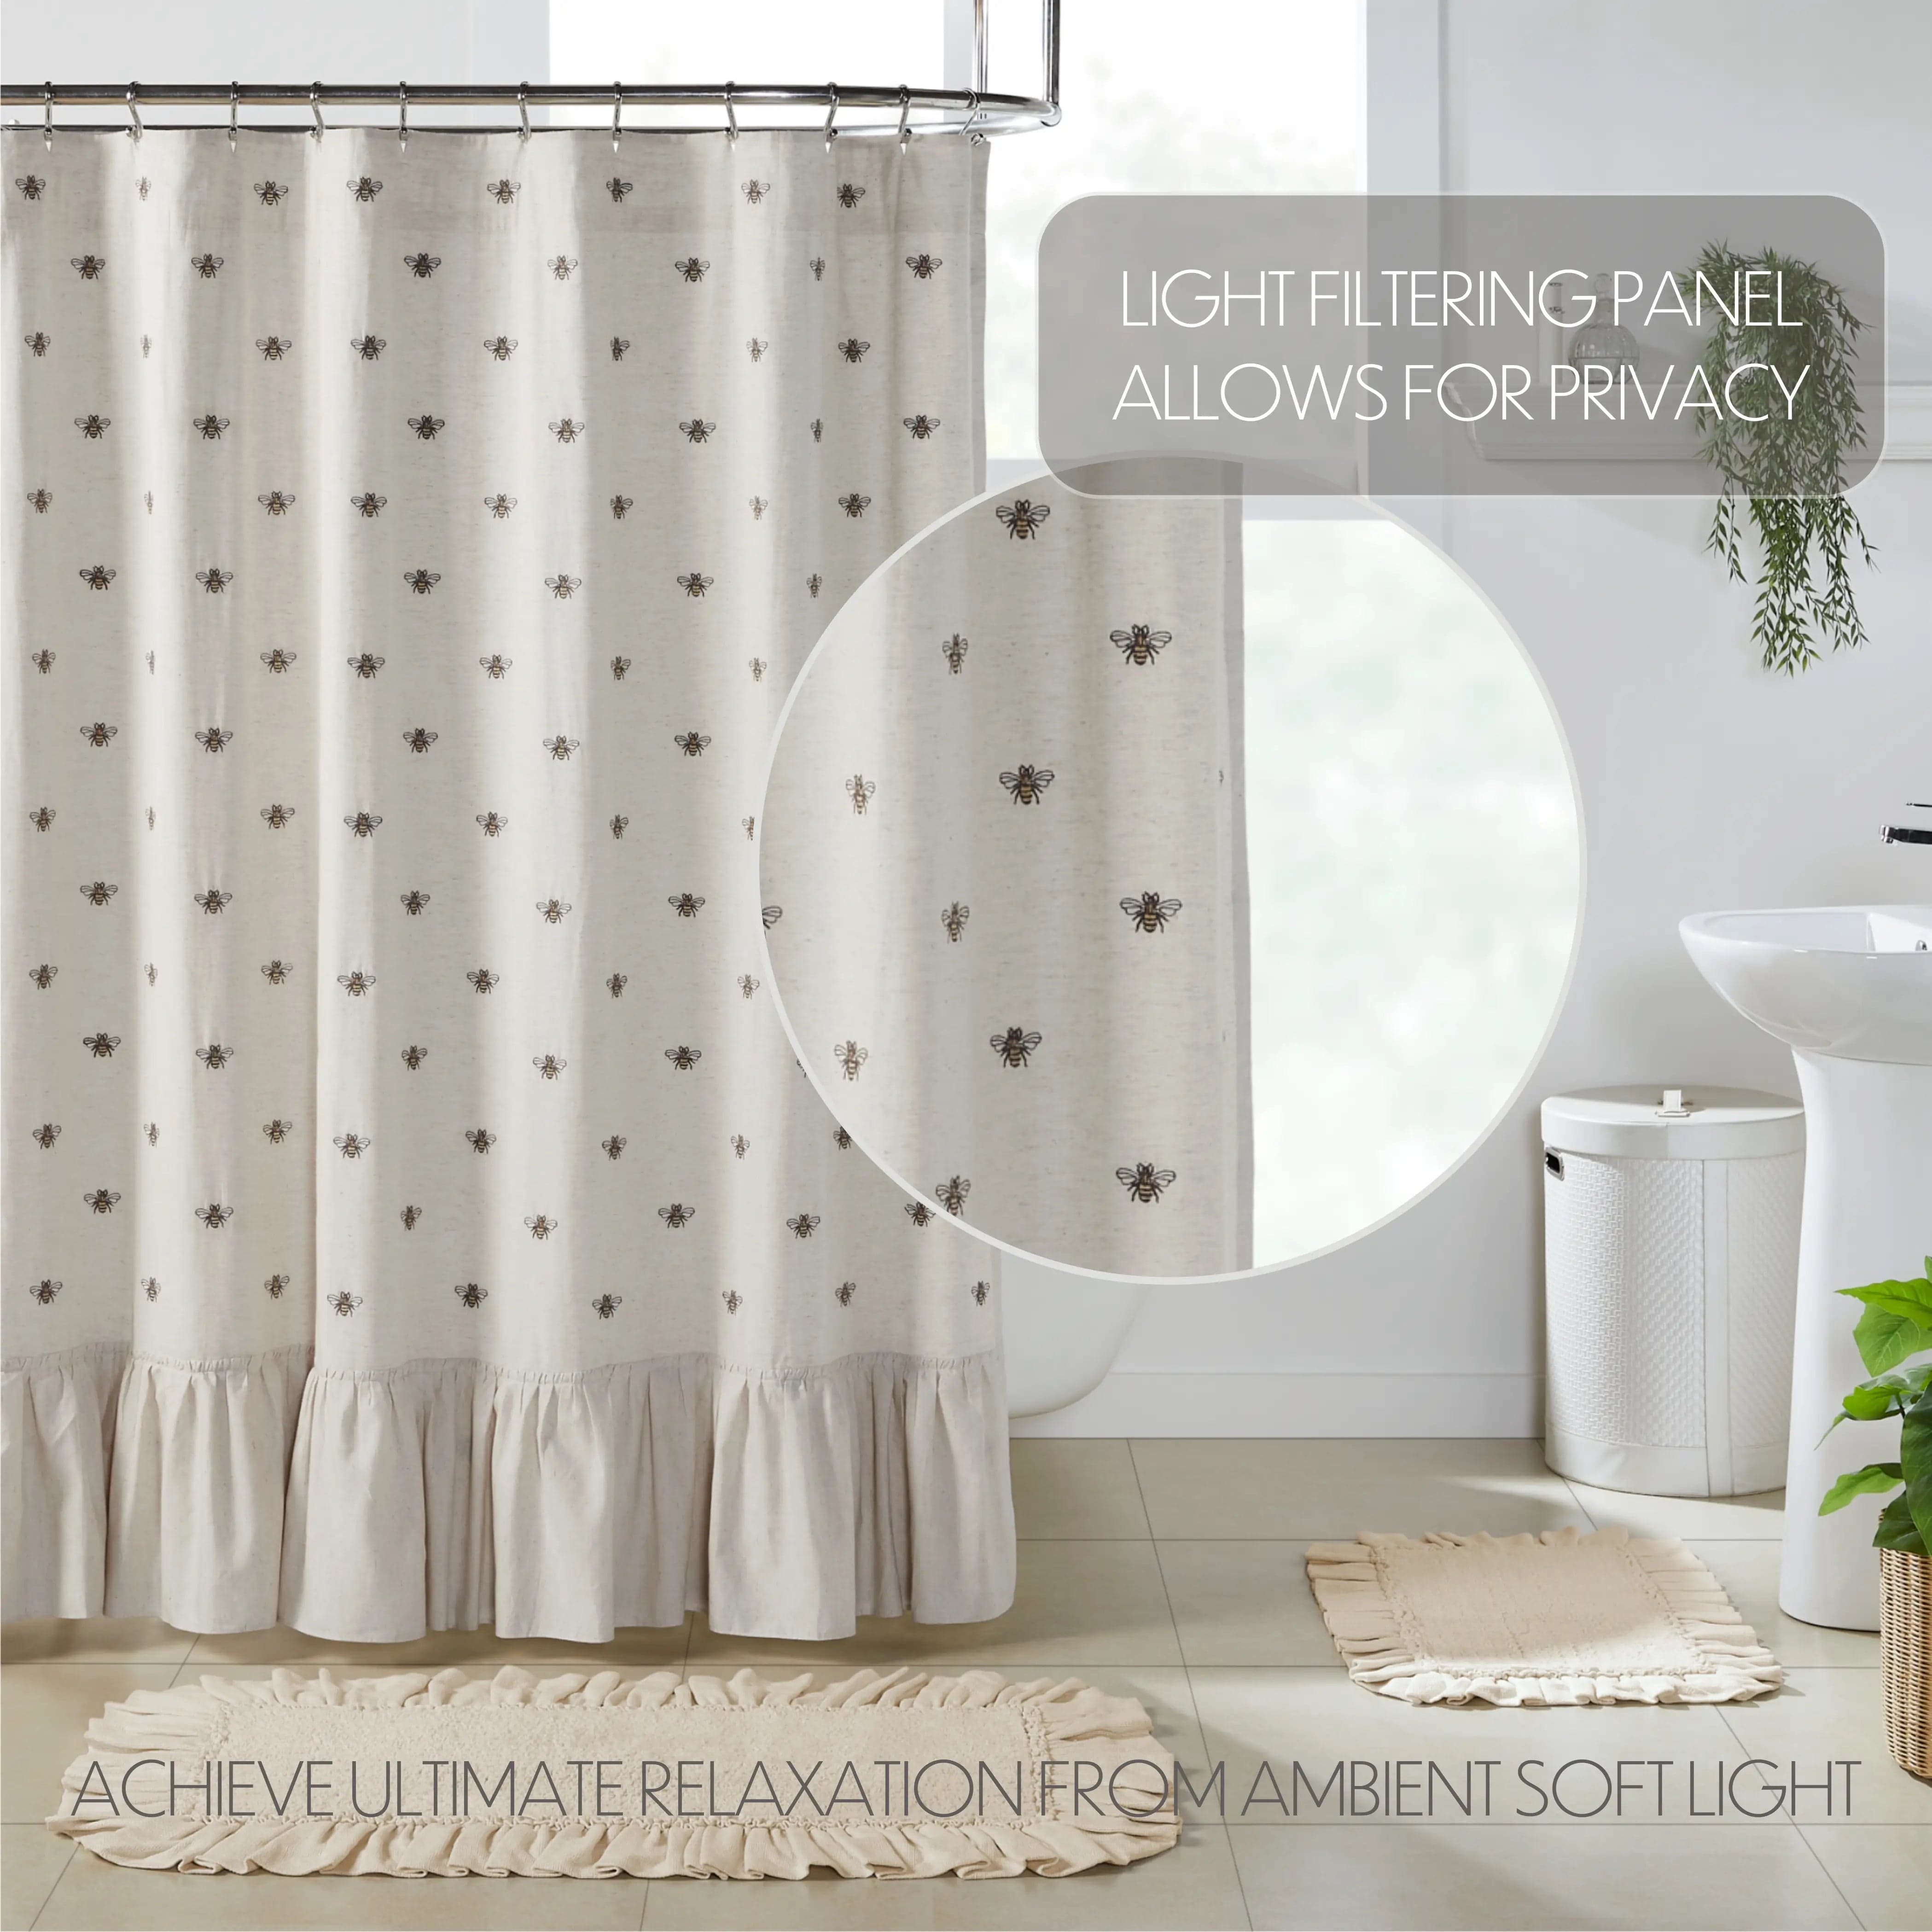 Honey Bee Shower Curtain Embroidered